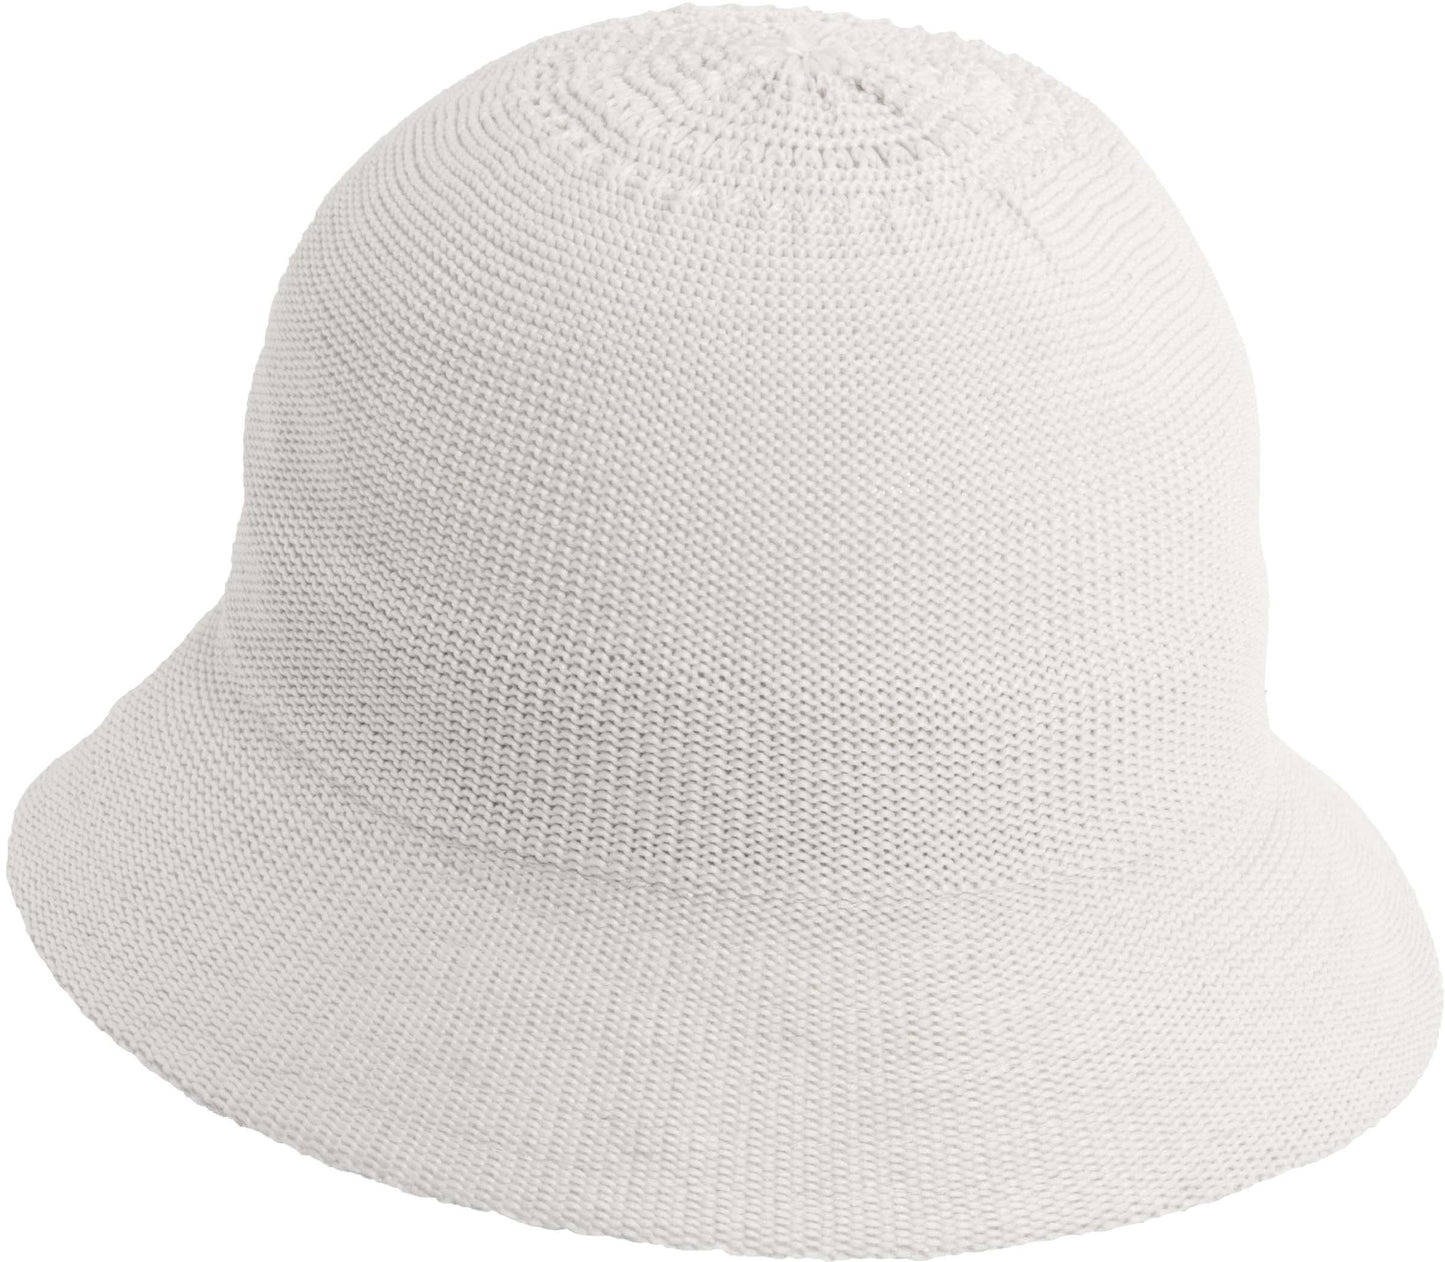 Knitted Polyester Packable Cloche Hat - Assorted Colors